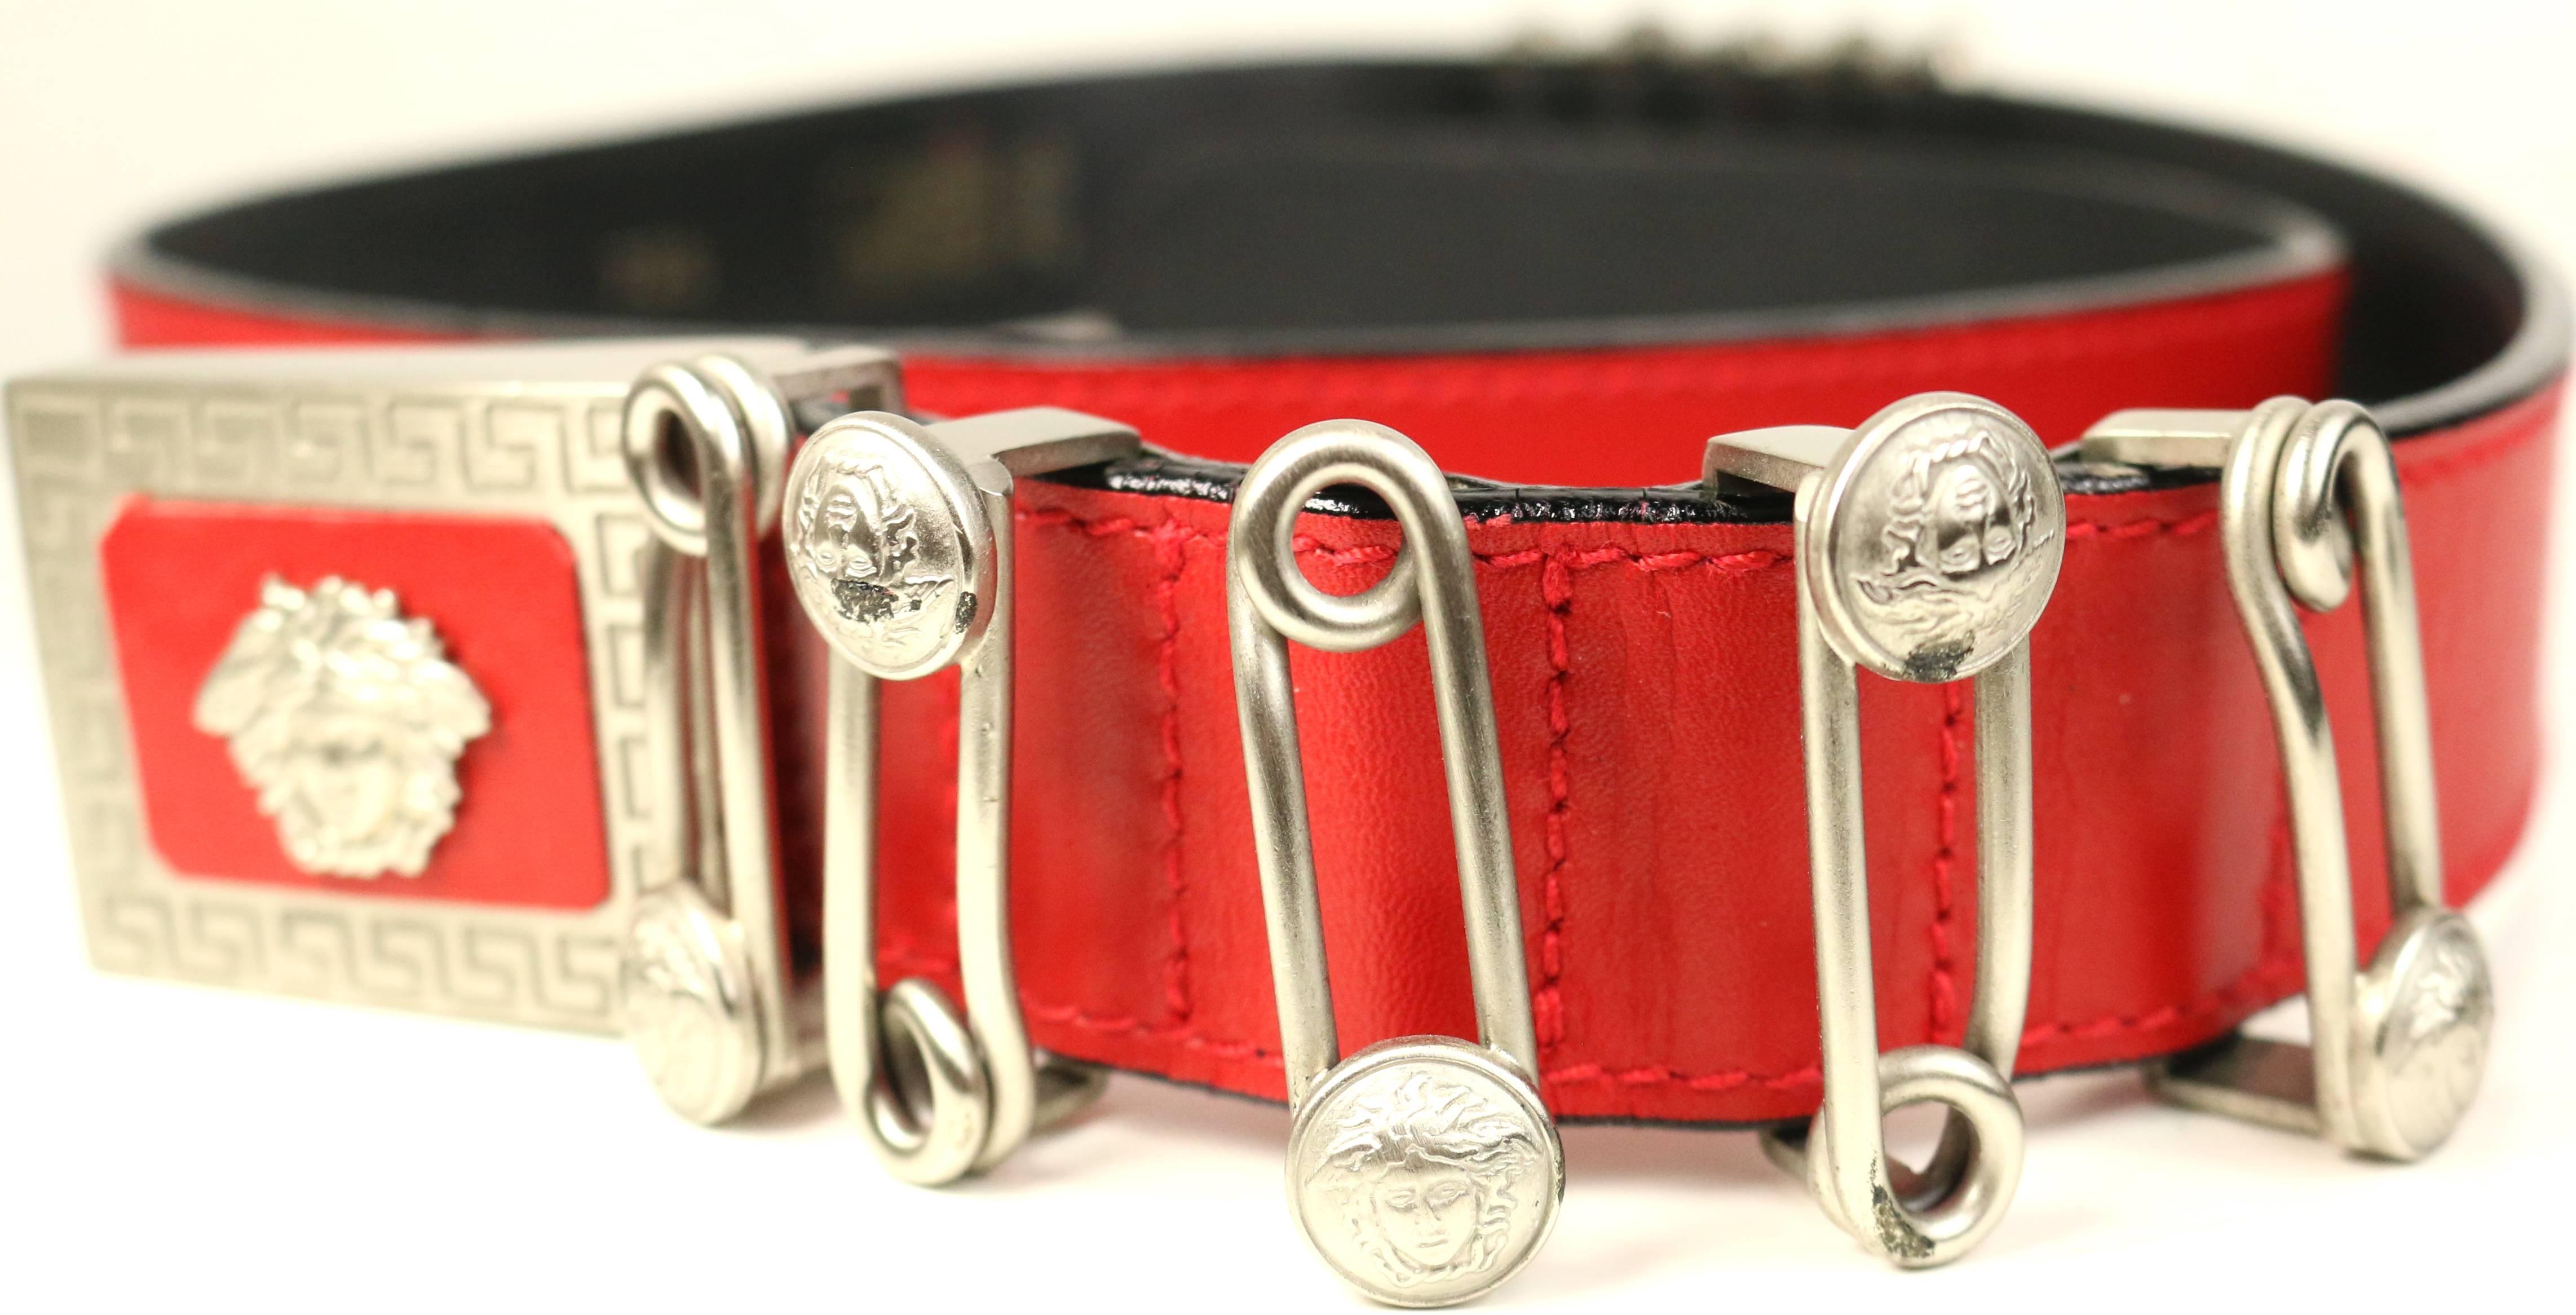 - Vintage 90s Gianni Versace red leather silver medusa pin belt. 

- Ten iconic sliver medusa pins. 

- Silver Medusa buckle closure. 

- Made in Italy. 

- Length: 35 inches. Width: 1.25 inches. 





